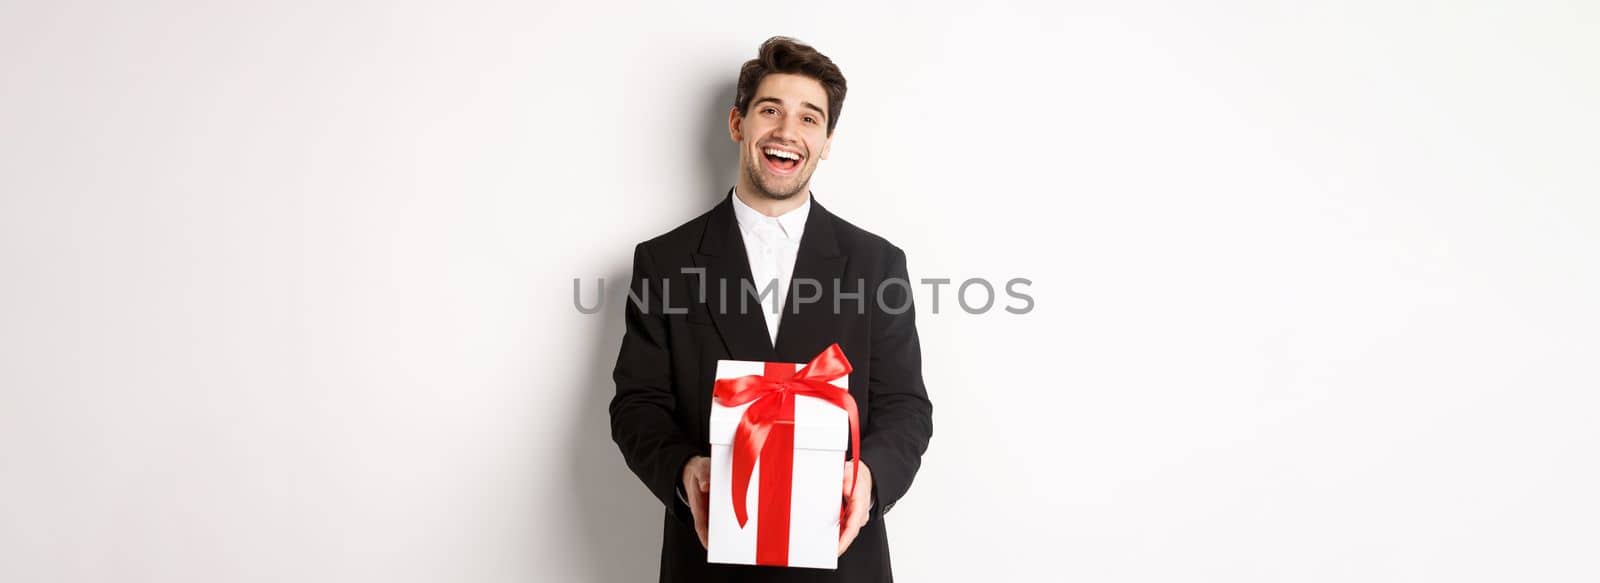 Concept of christmas holidays, celebration and lifestyle. Joyful handsome man in black suit, holding xmas gift and smiling, standing against white background.